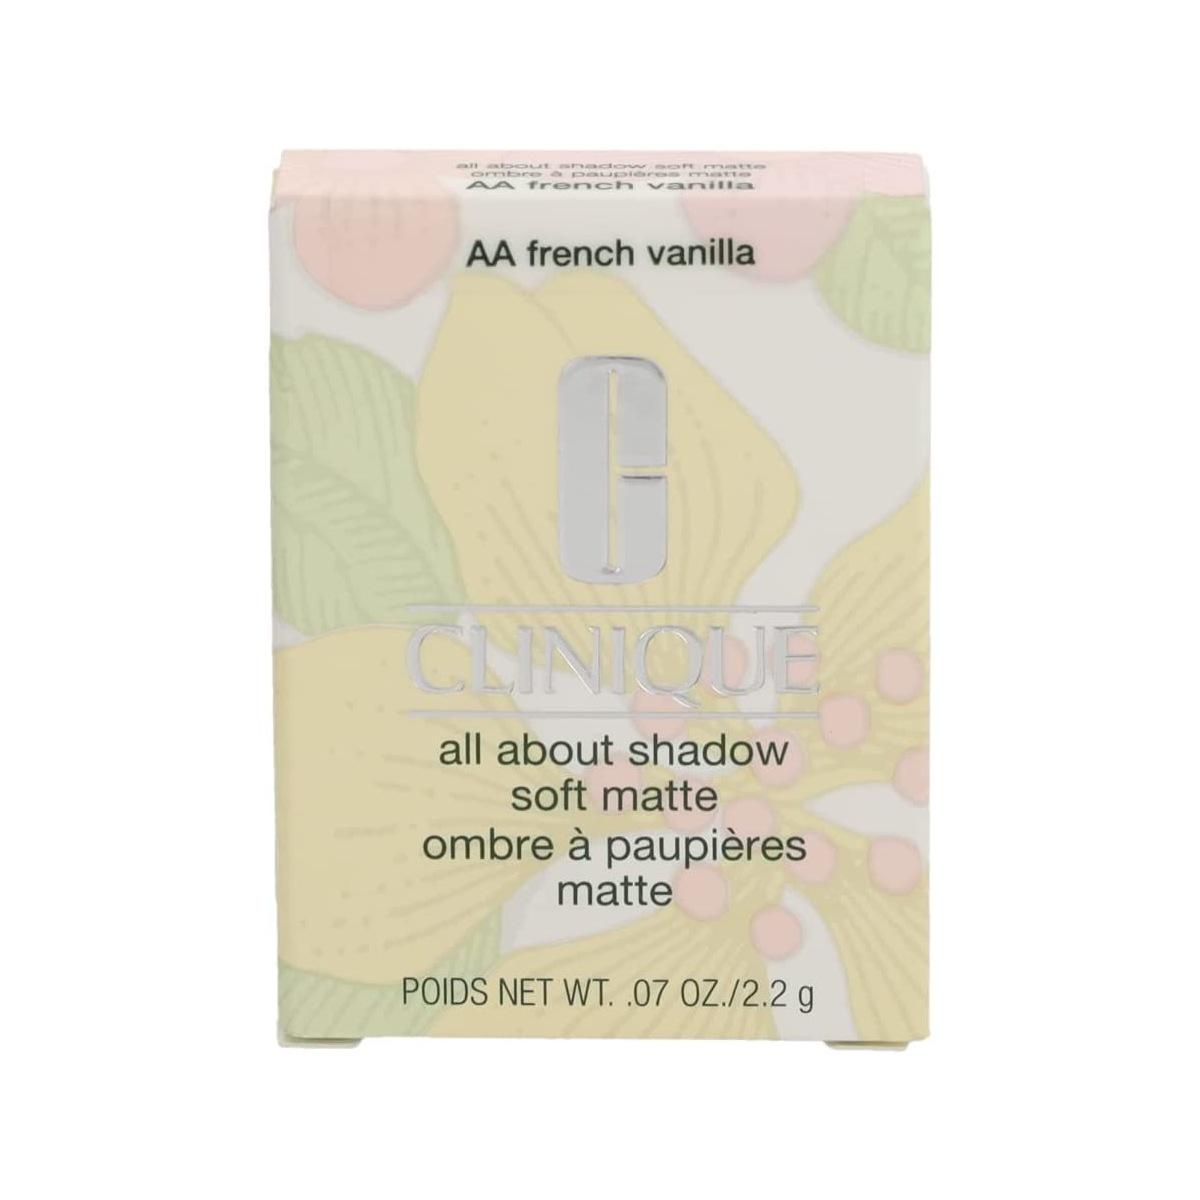 All about shadow mono matte aa french vanilla 2,2 gr